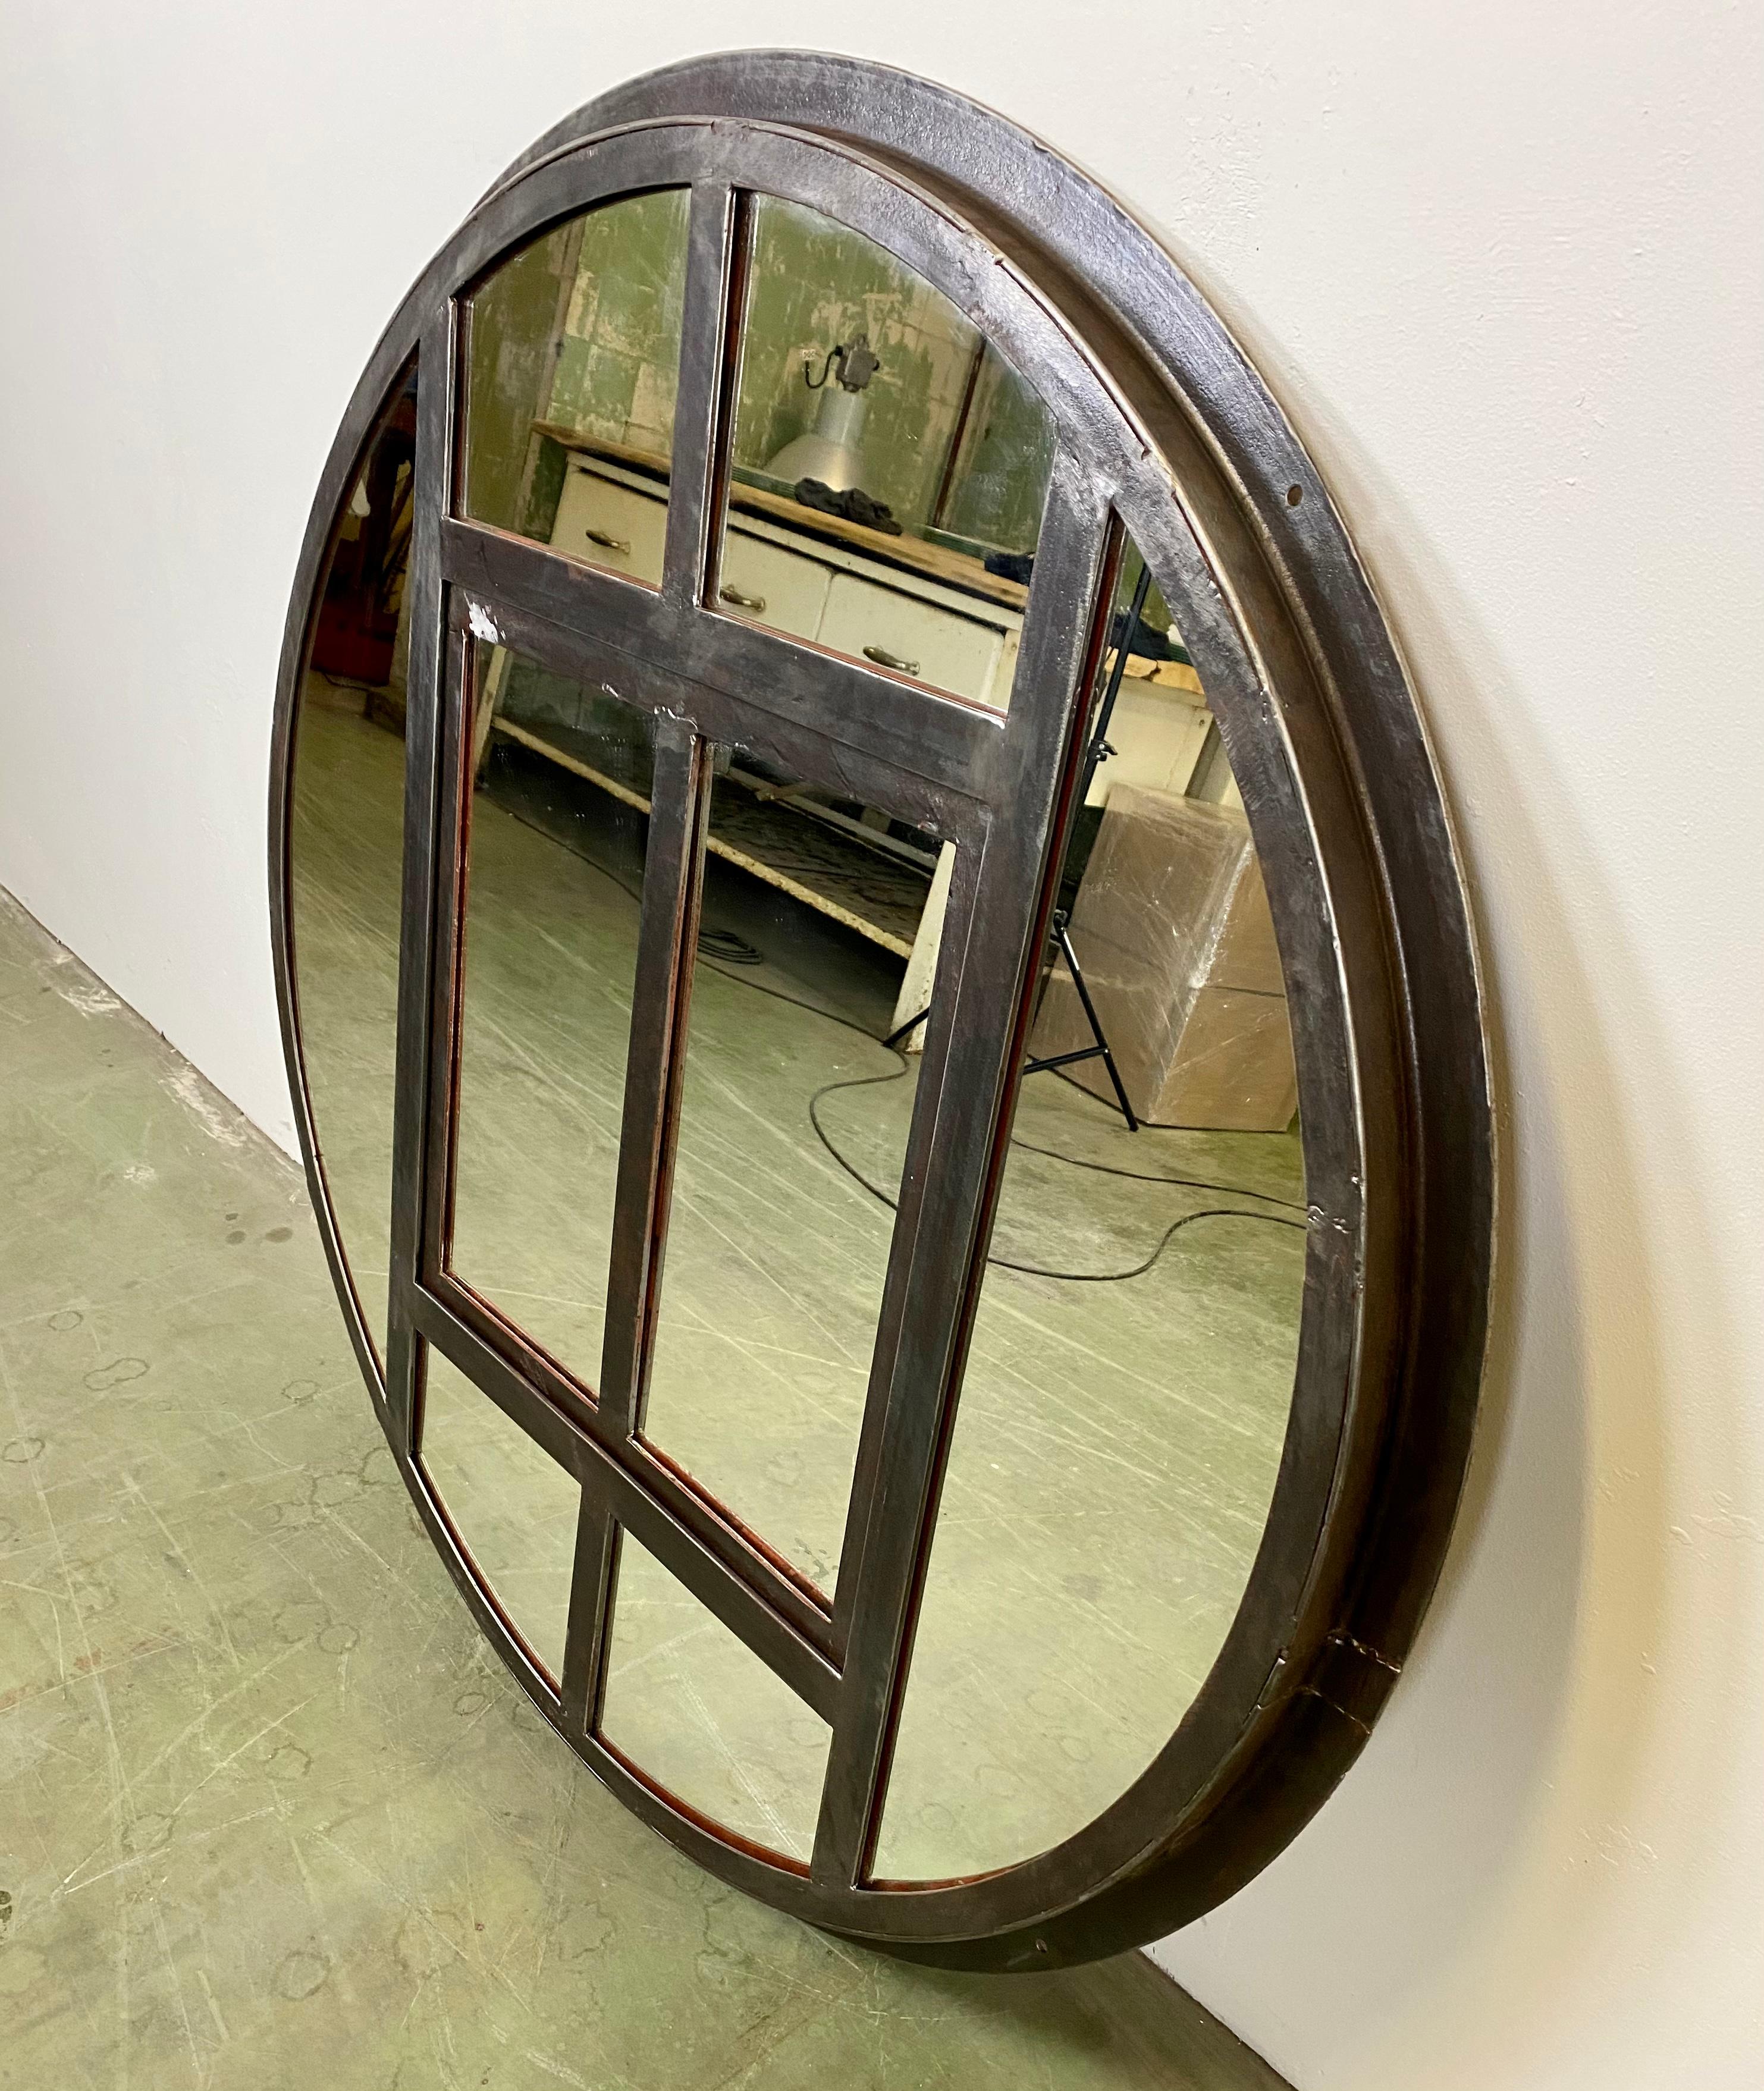 Circle iron industrial window frame has been transformed into a mirror. The weight of the mirror is 45 kg. The diameter of the mirror is 111 cm.